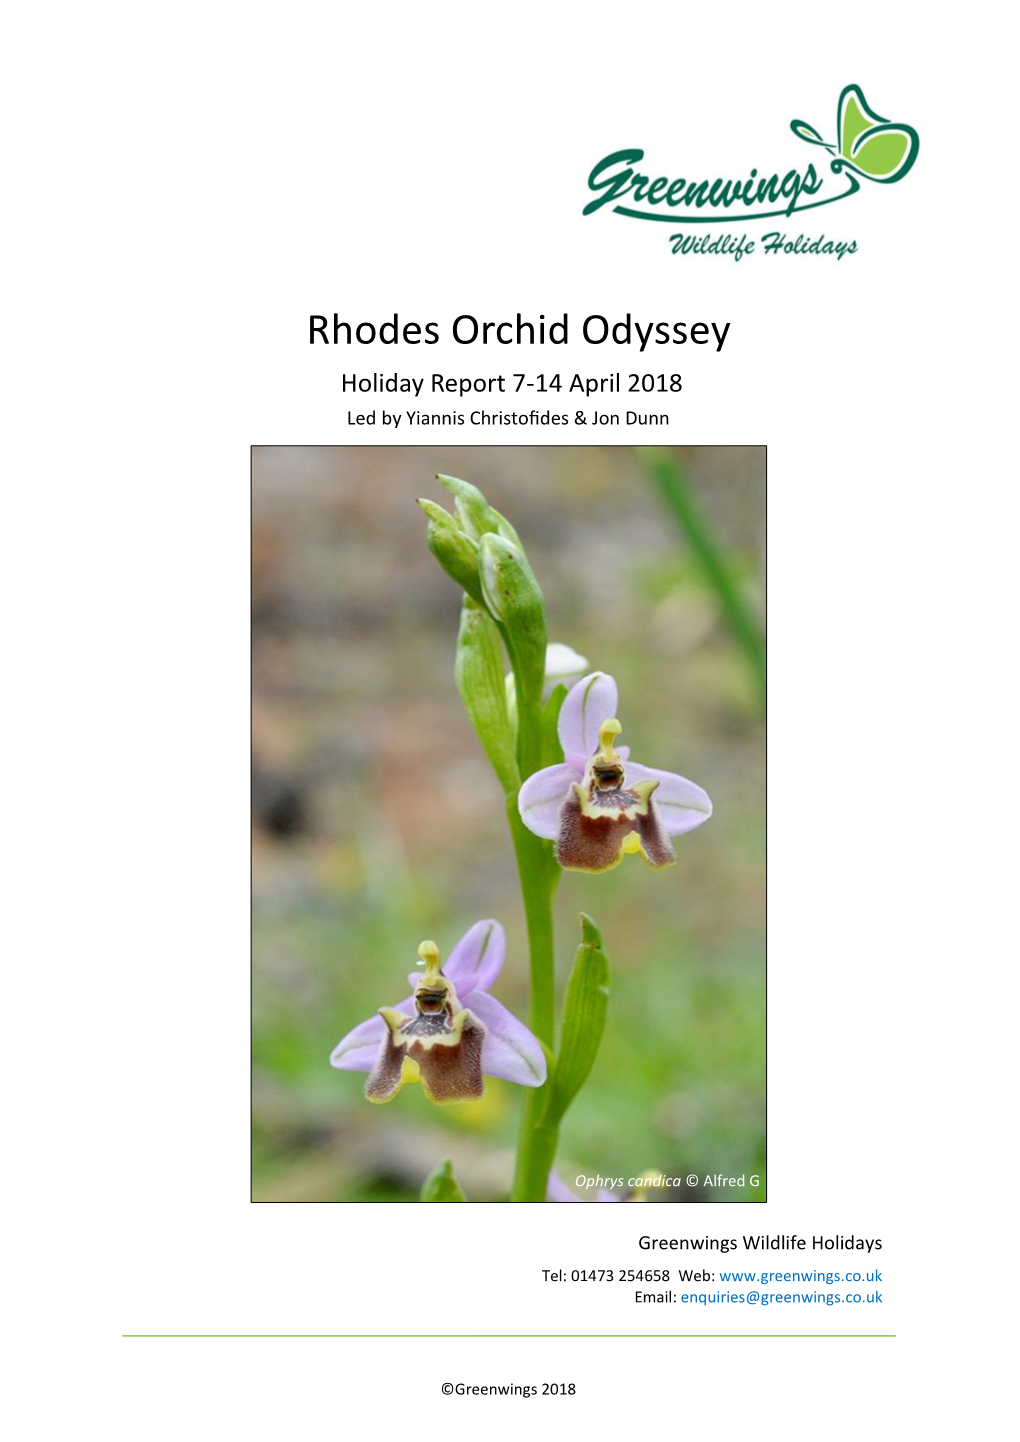 Rhodes Orchid Odyssey Holiday Report 2018